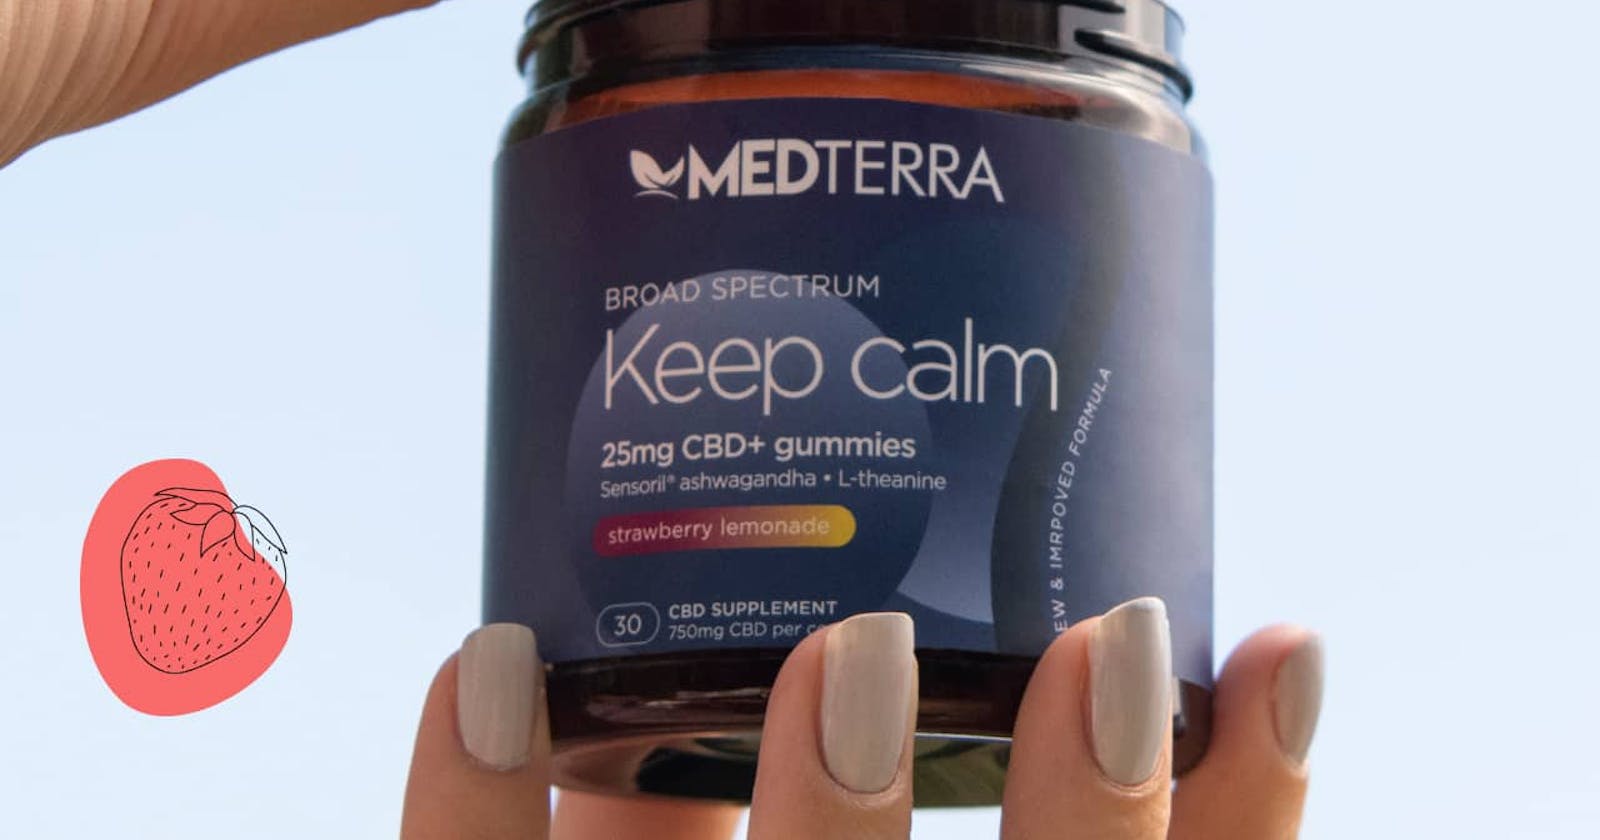 Medterra CBD Gummies For Pain Relief & Stress: Price & Where To Buy?